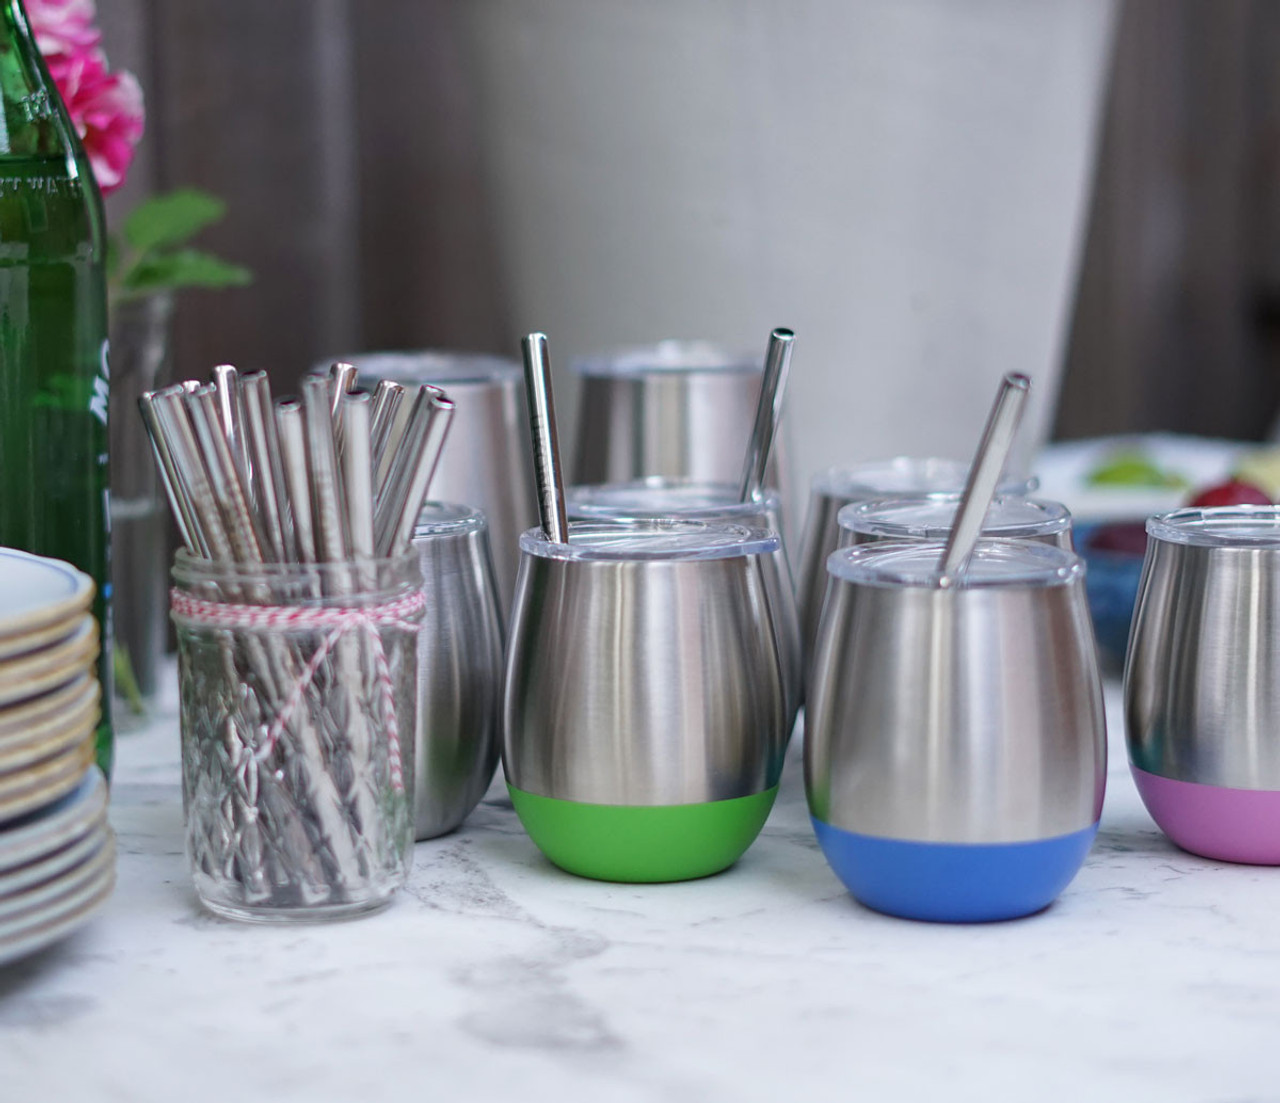 https://cdn11.bigcommerce.com/s-j602wc6a/images/stencil/1280x1280/products/7240/25514/reusable-stainless-steel-mini-straws__34458.1542407201.jpg?c=2